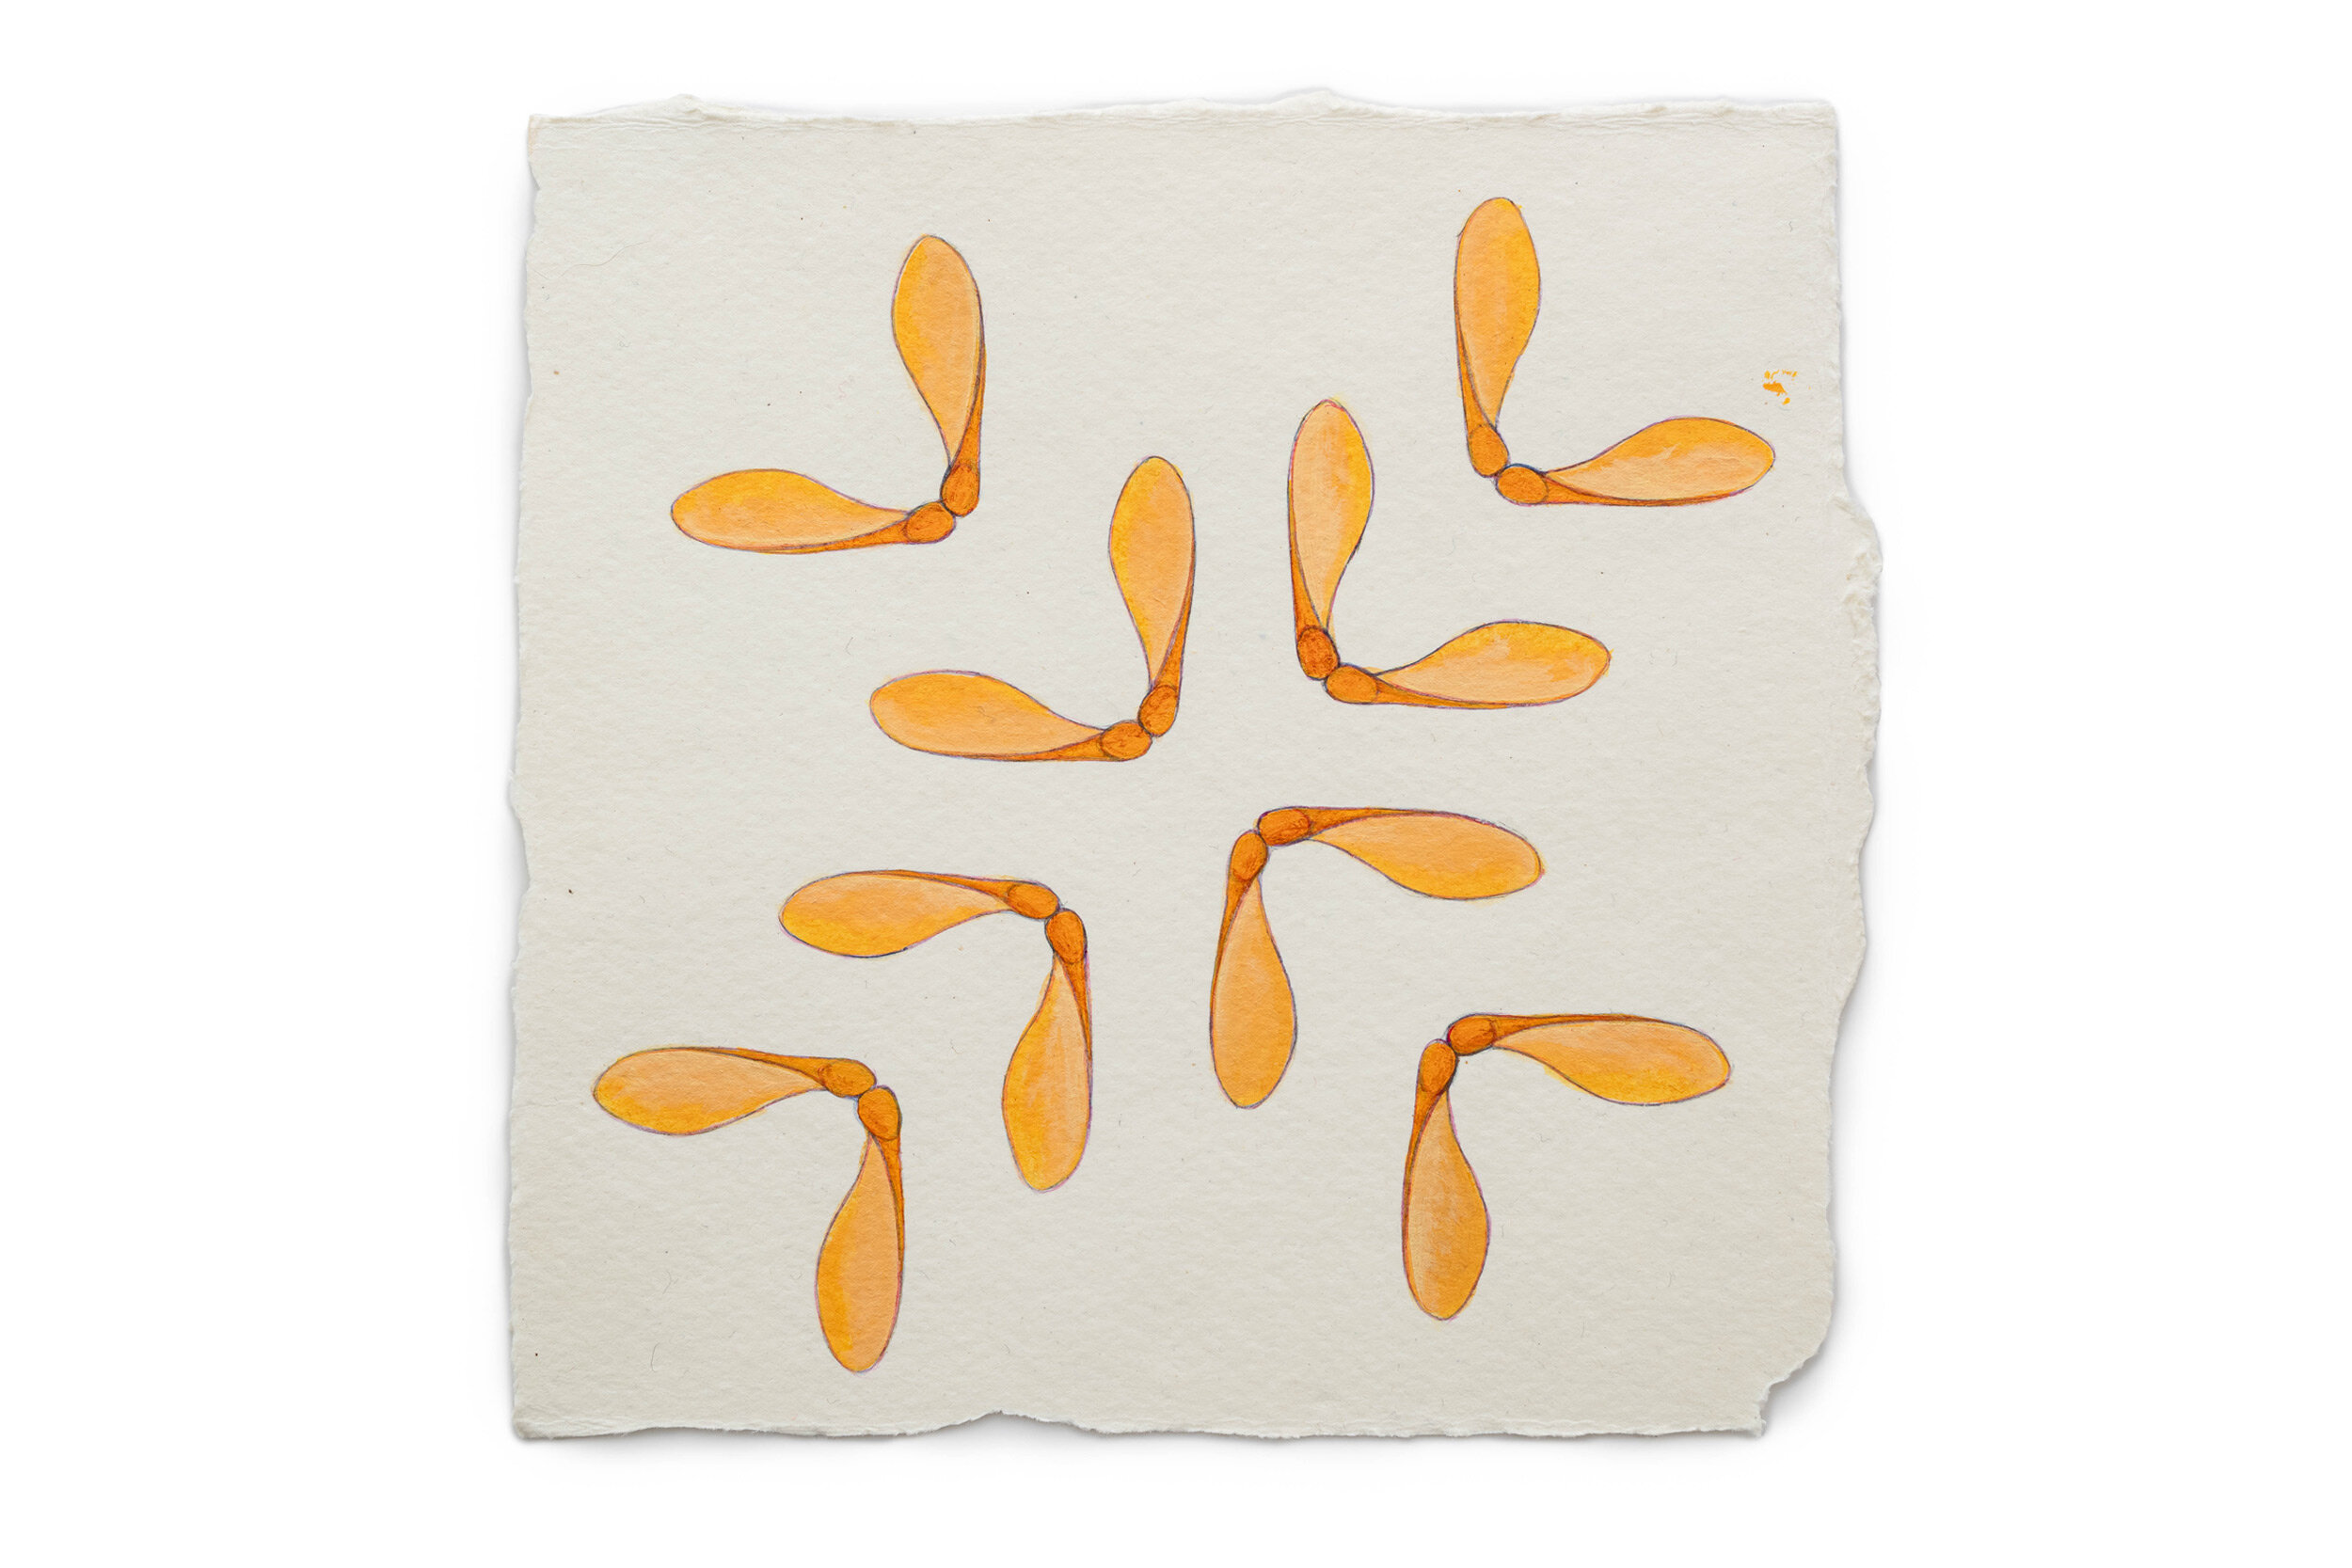   Fire Diary (Maple Pods),  2019 Acrylic on paper, 6” x 6” each 